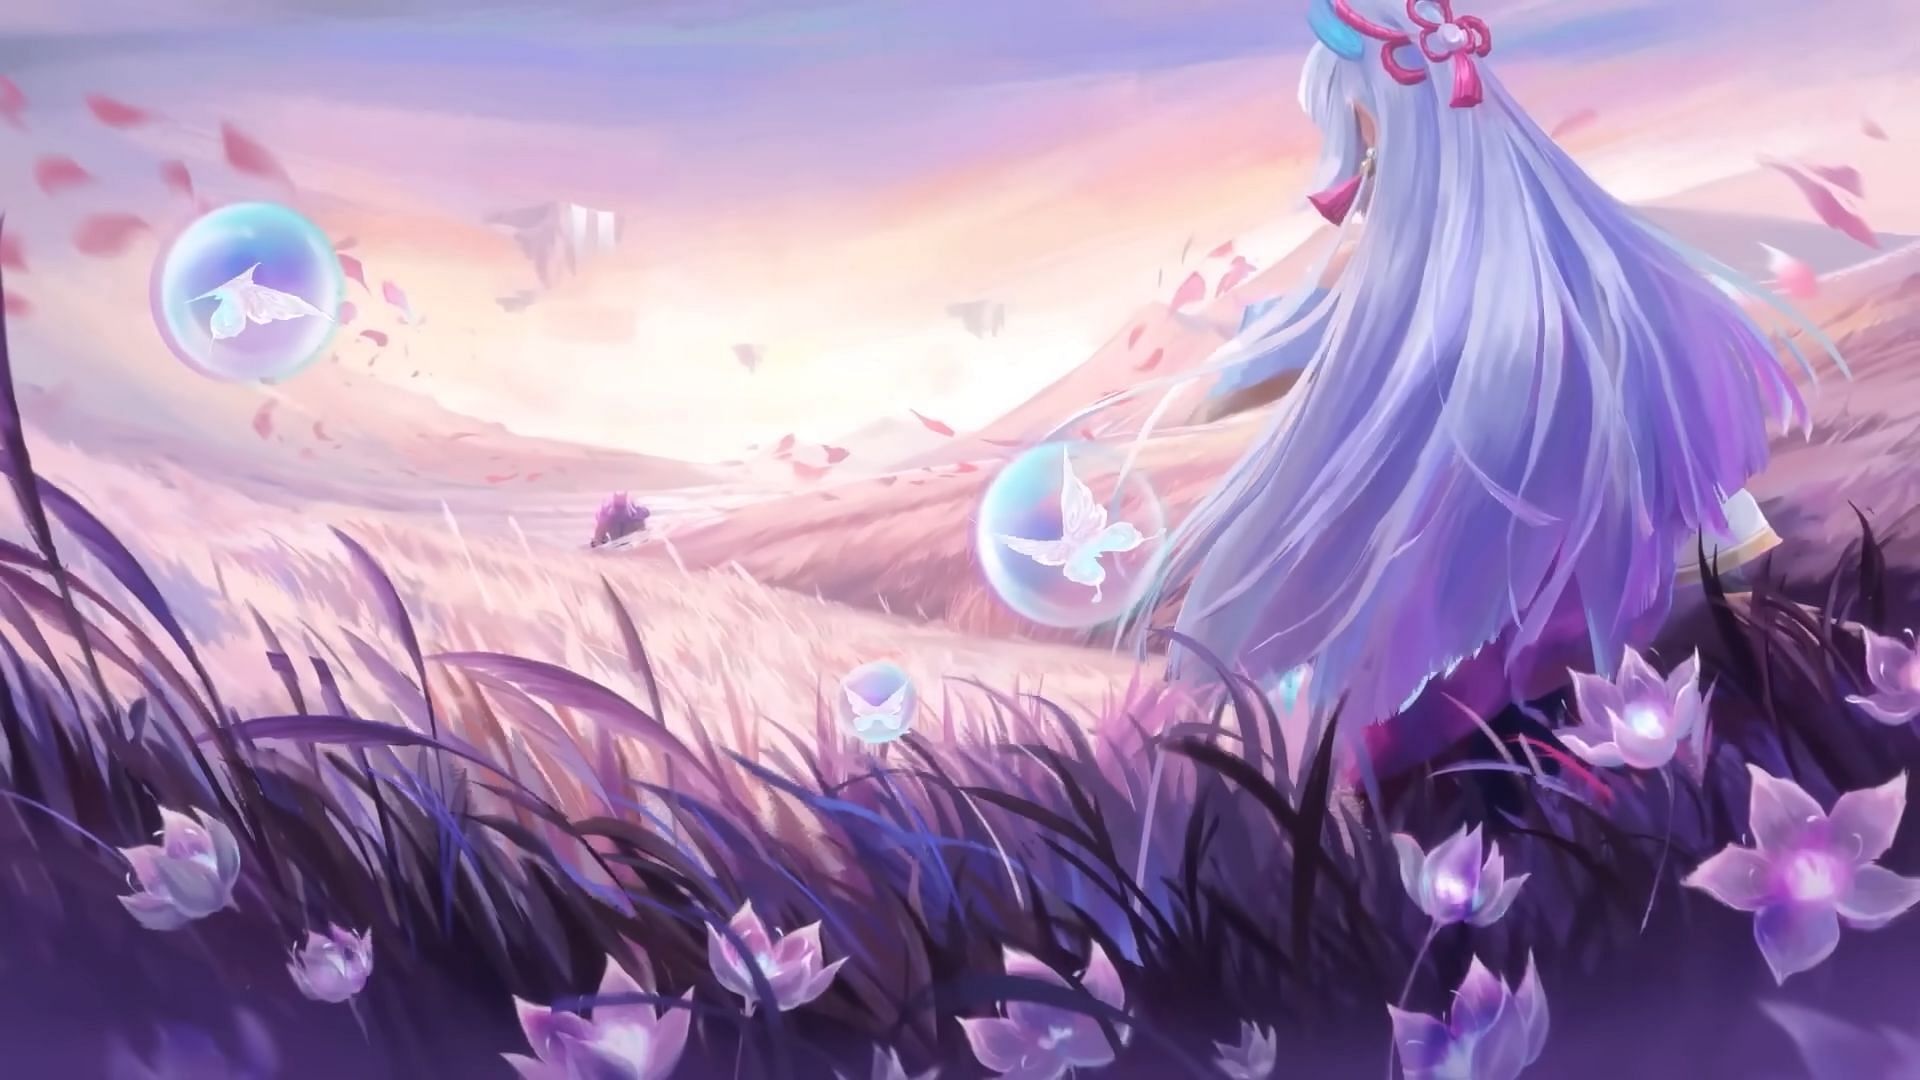 Syndra Easter egg as shown in the trailer (Image via League of Legends)